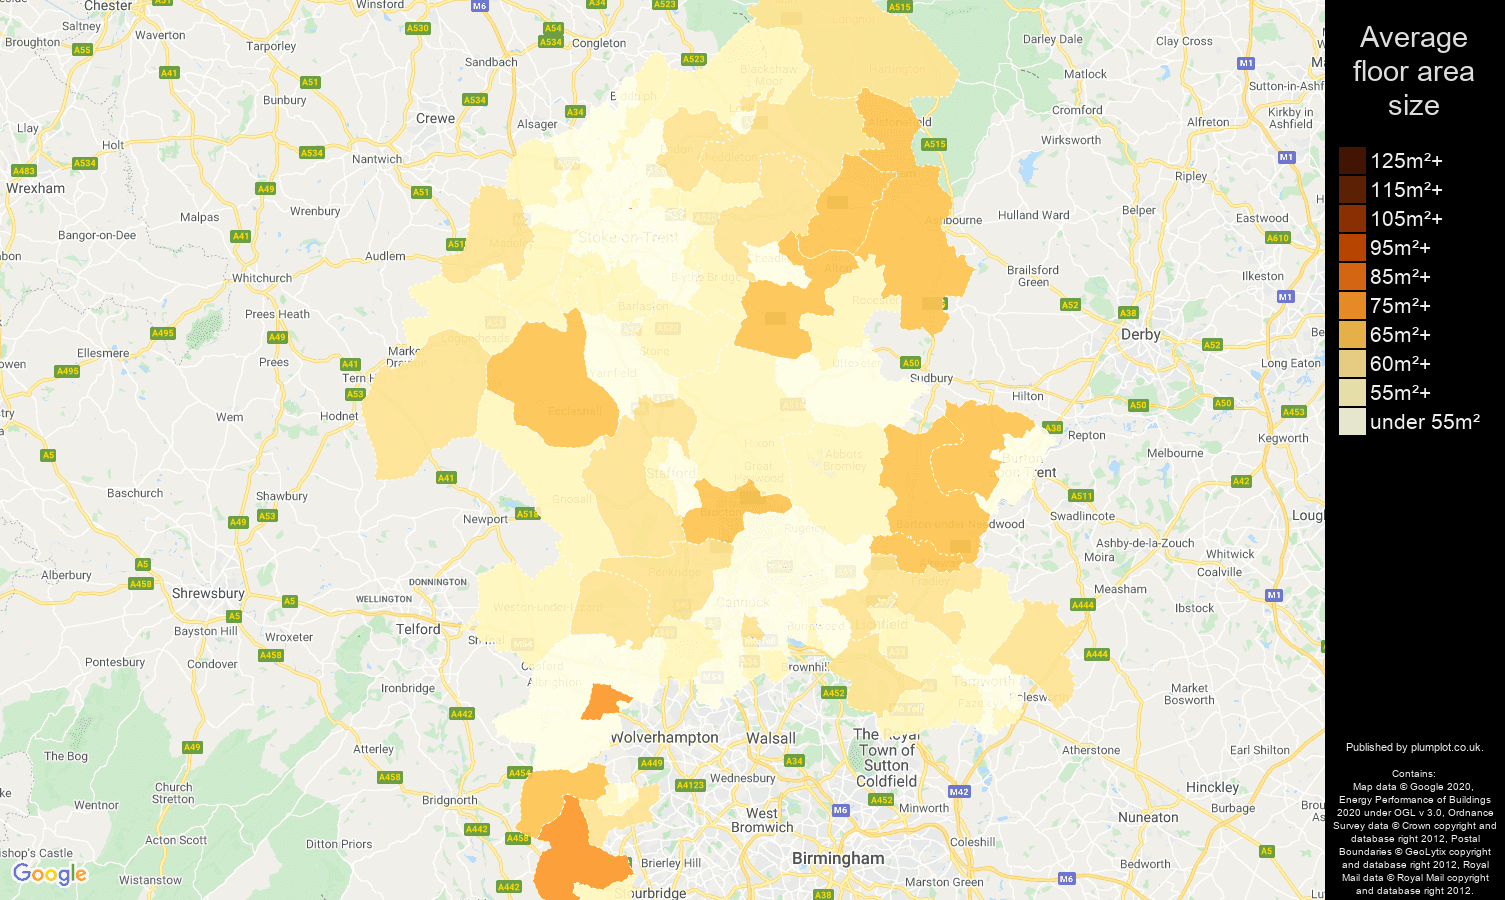 Staffordshire map of average floor area size of flats